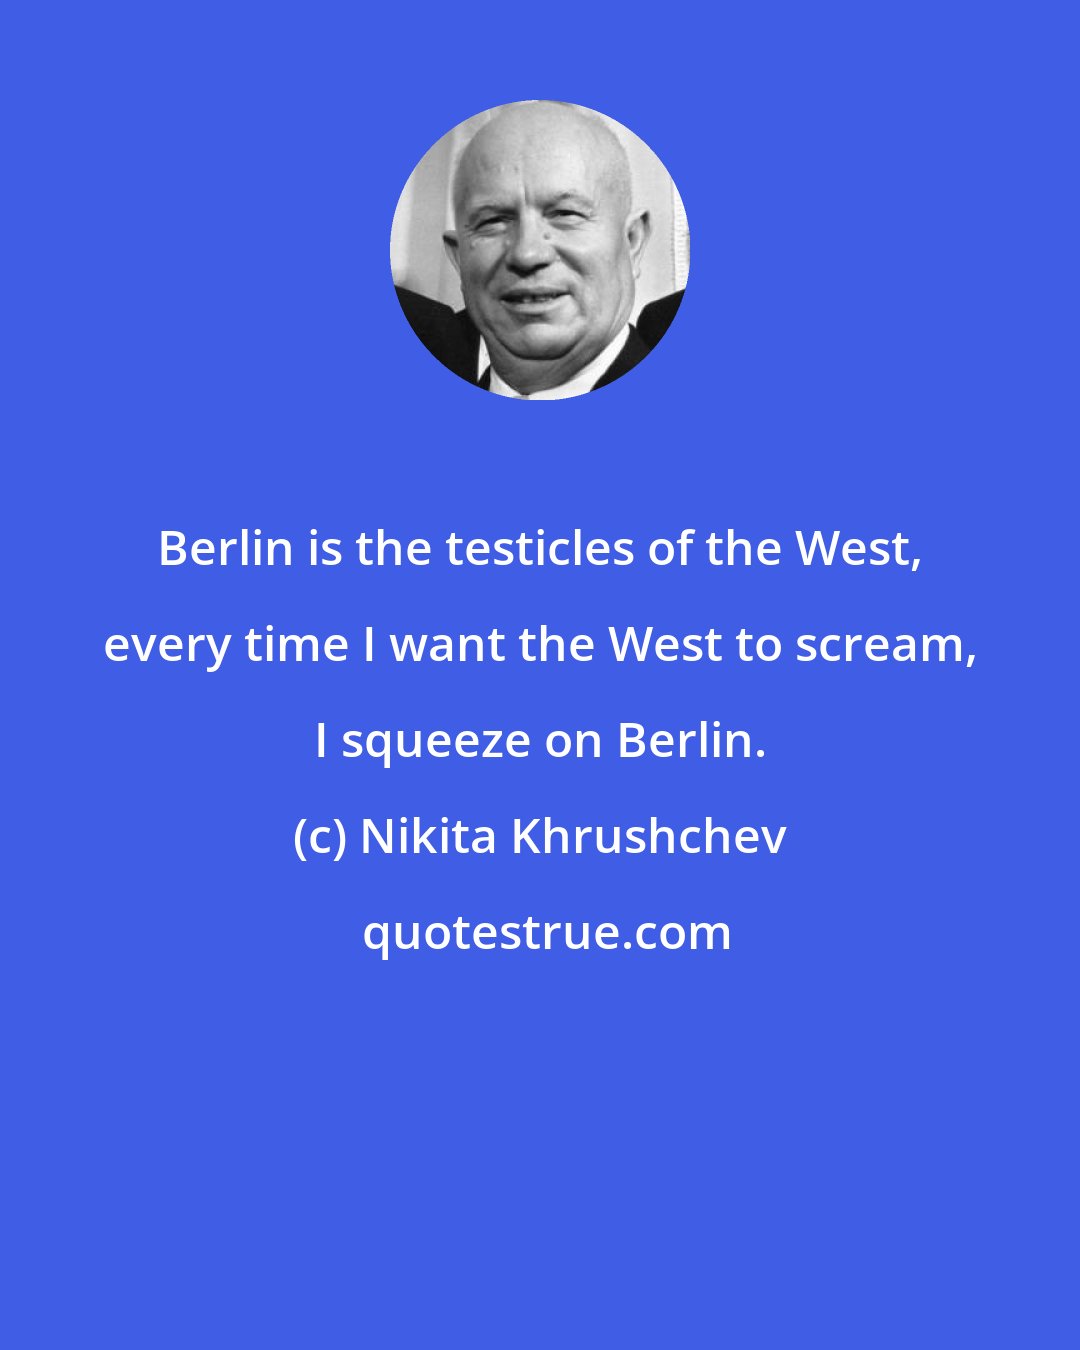 Nikita Khrushchev: Berlin is the testicles of the West, every time I want the West to scream, I squeeze on Berlin.